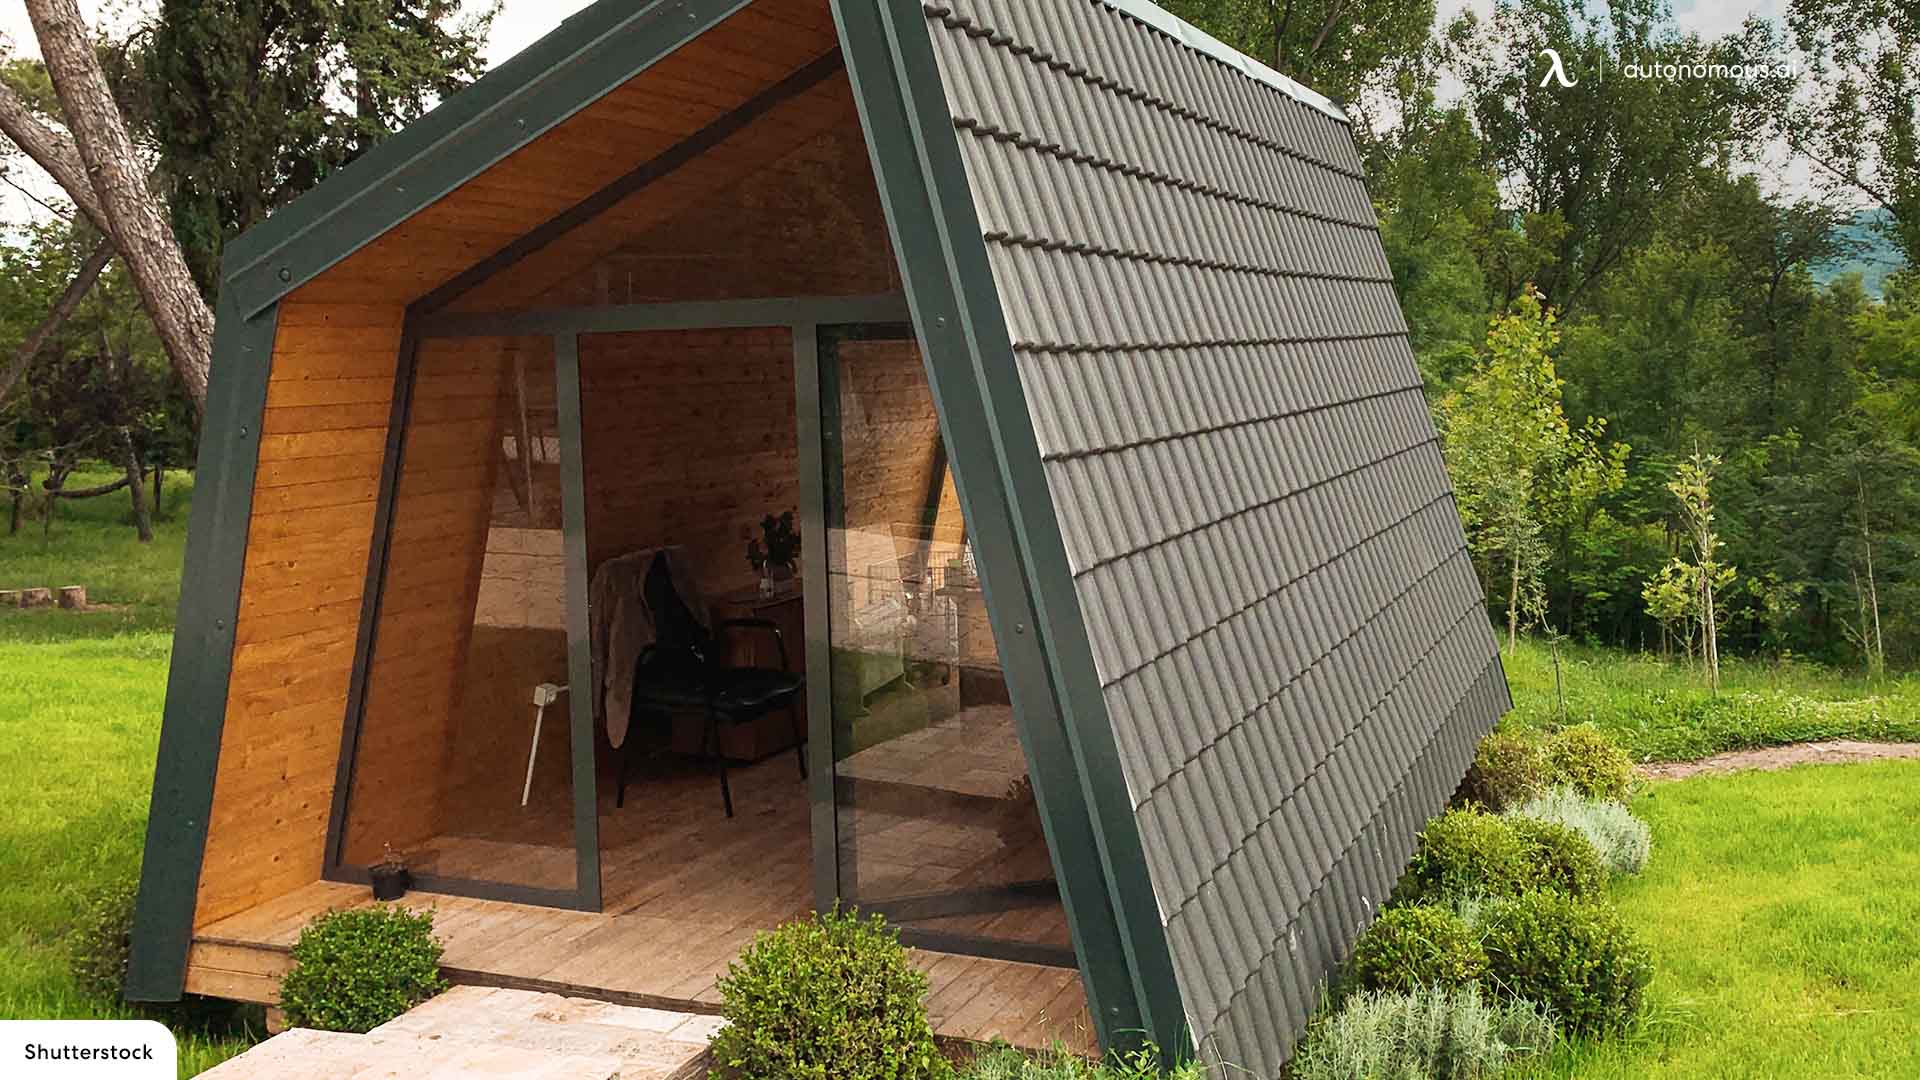 Do You Need Planning Permission to Build a Garden Office?